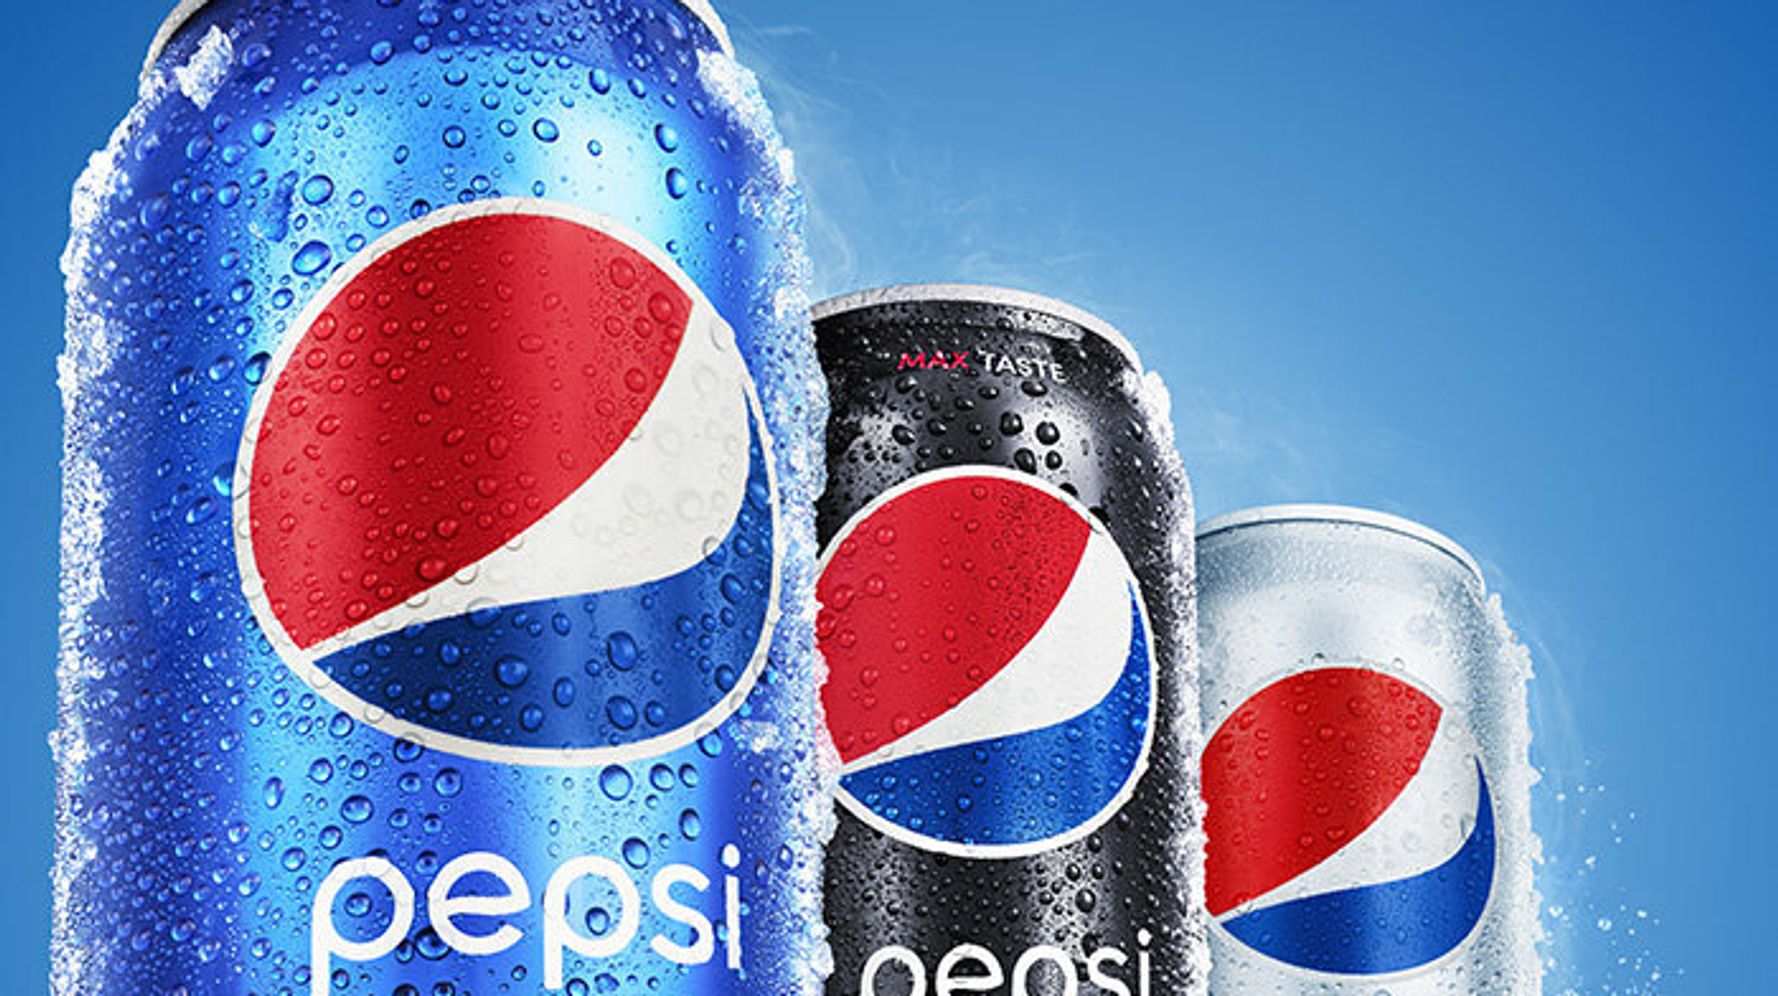 Twitter Users Slam Pepsi Soda Ad That Promotes COVID-19 Testing Site ...